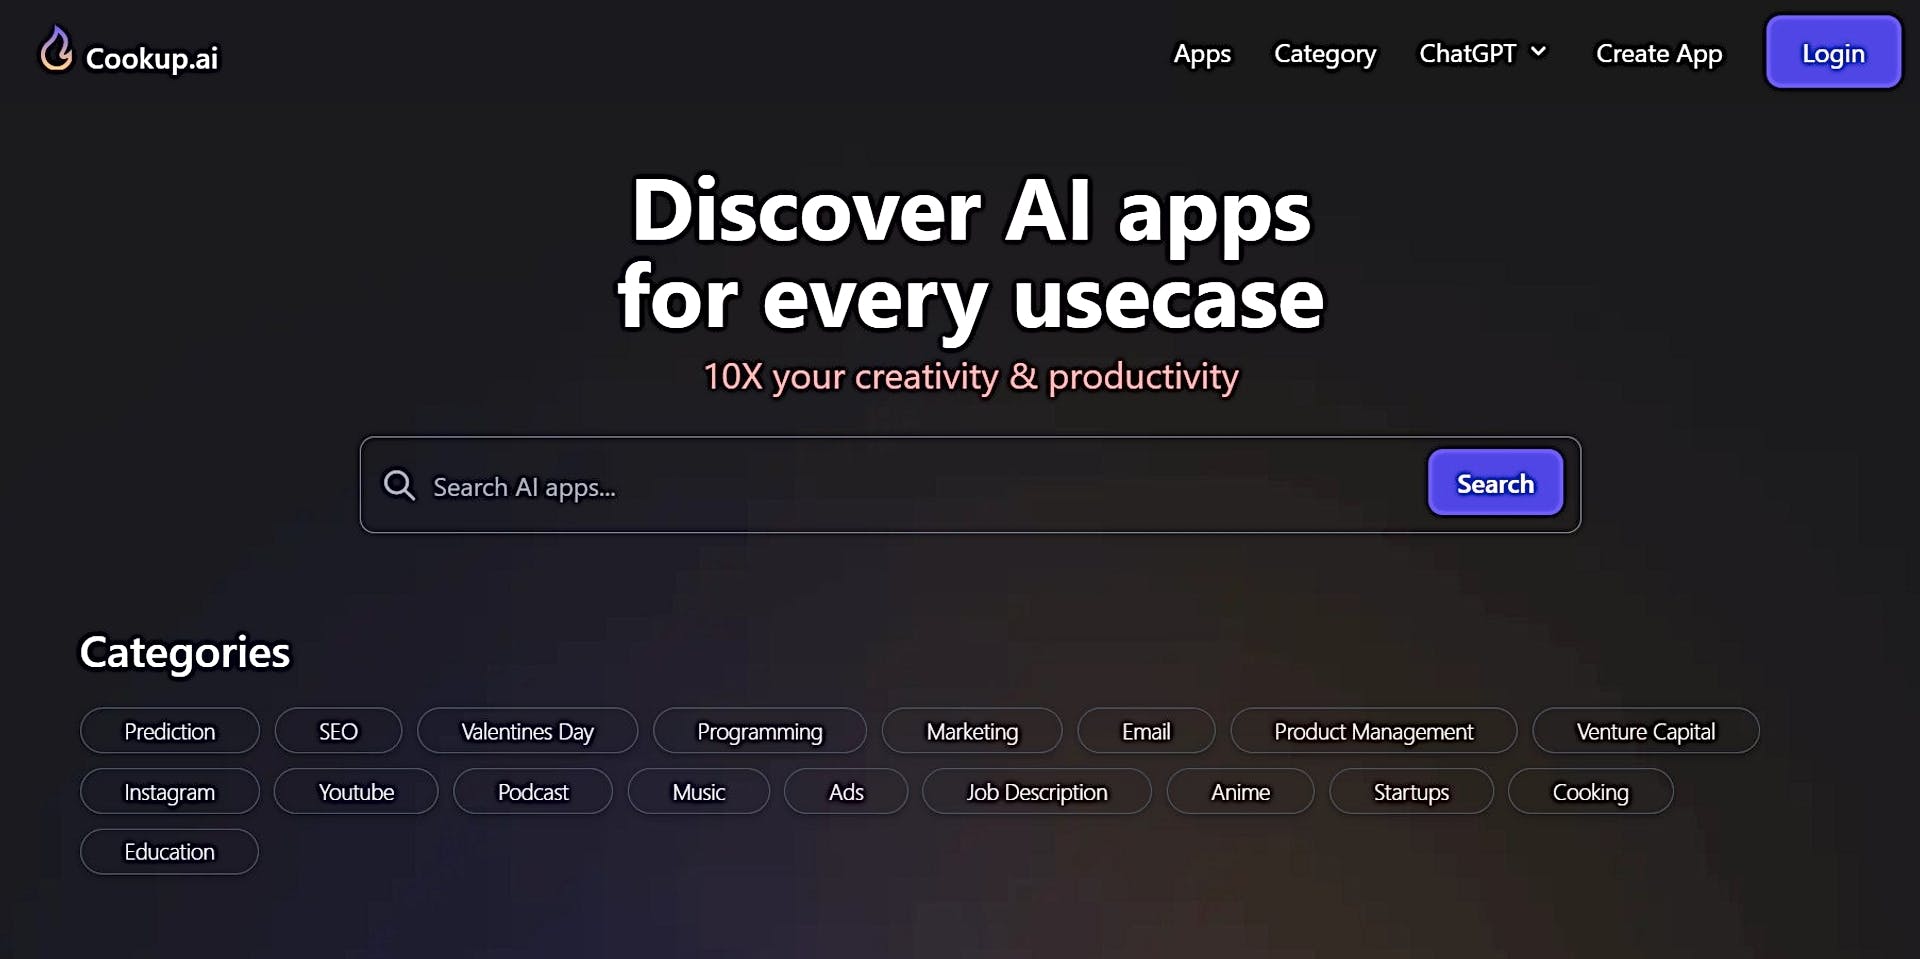 Cookup.ai featured